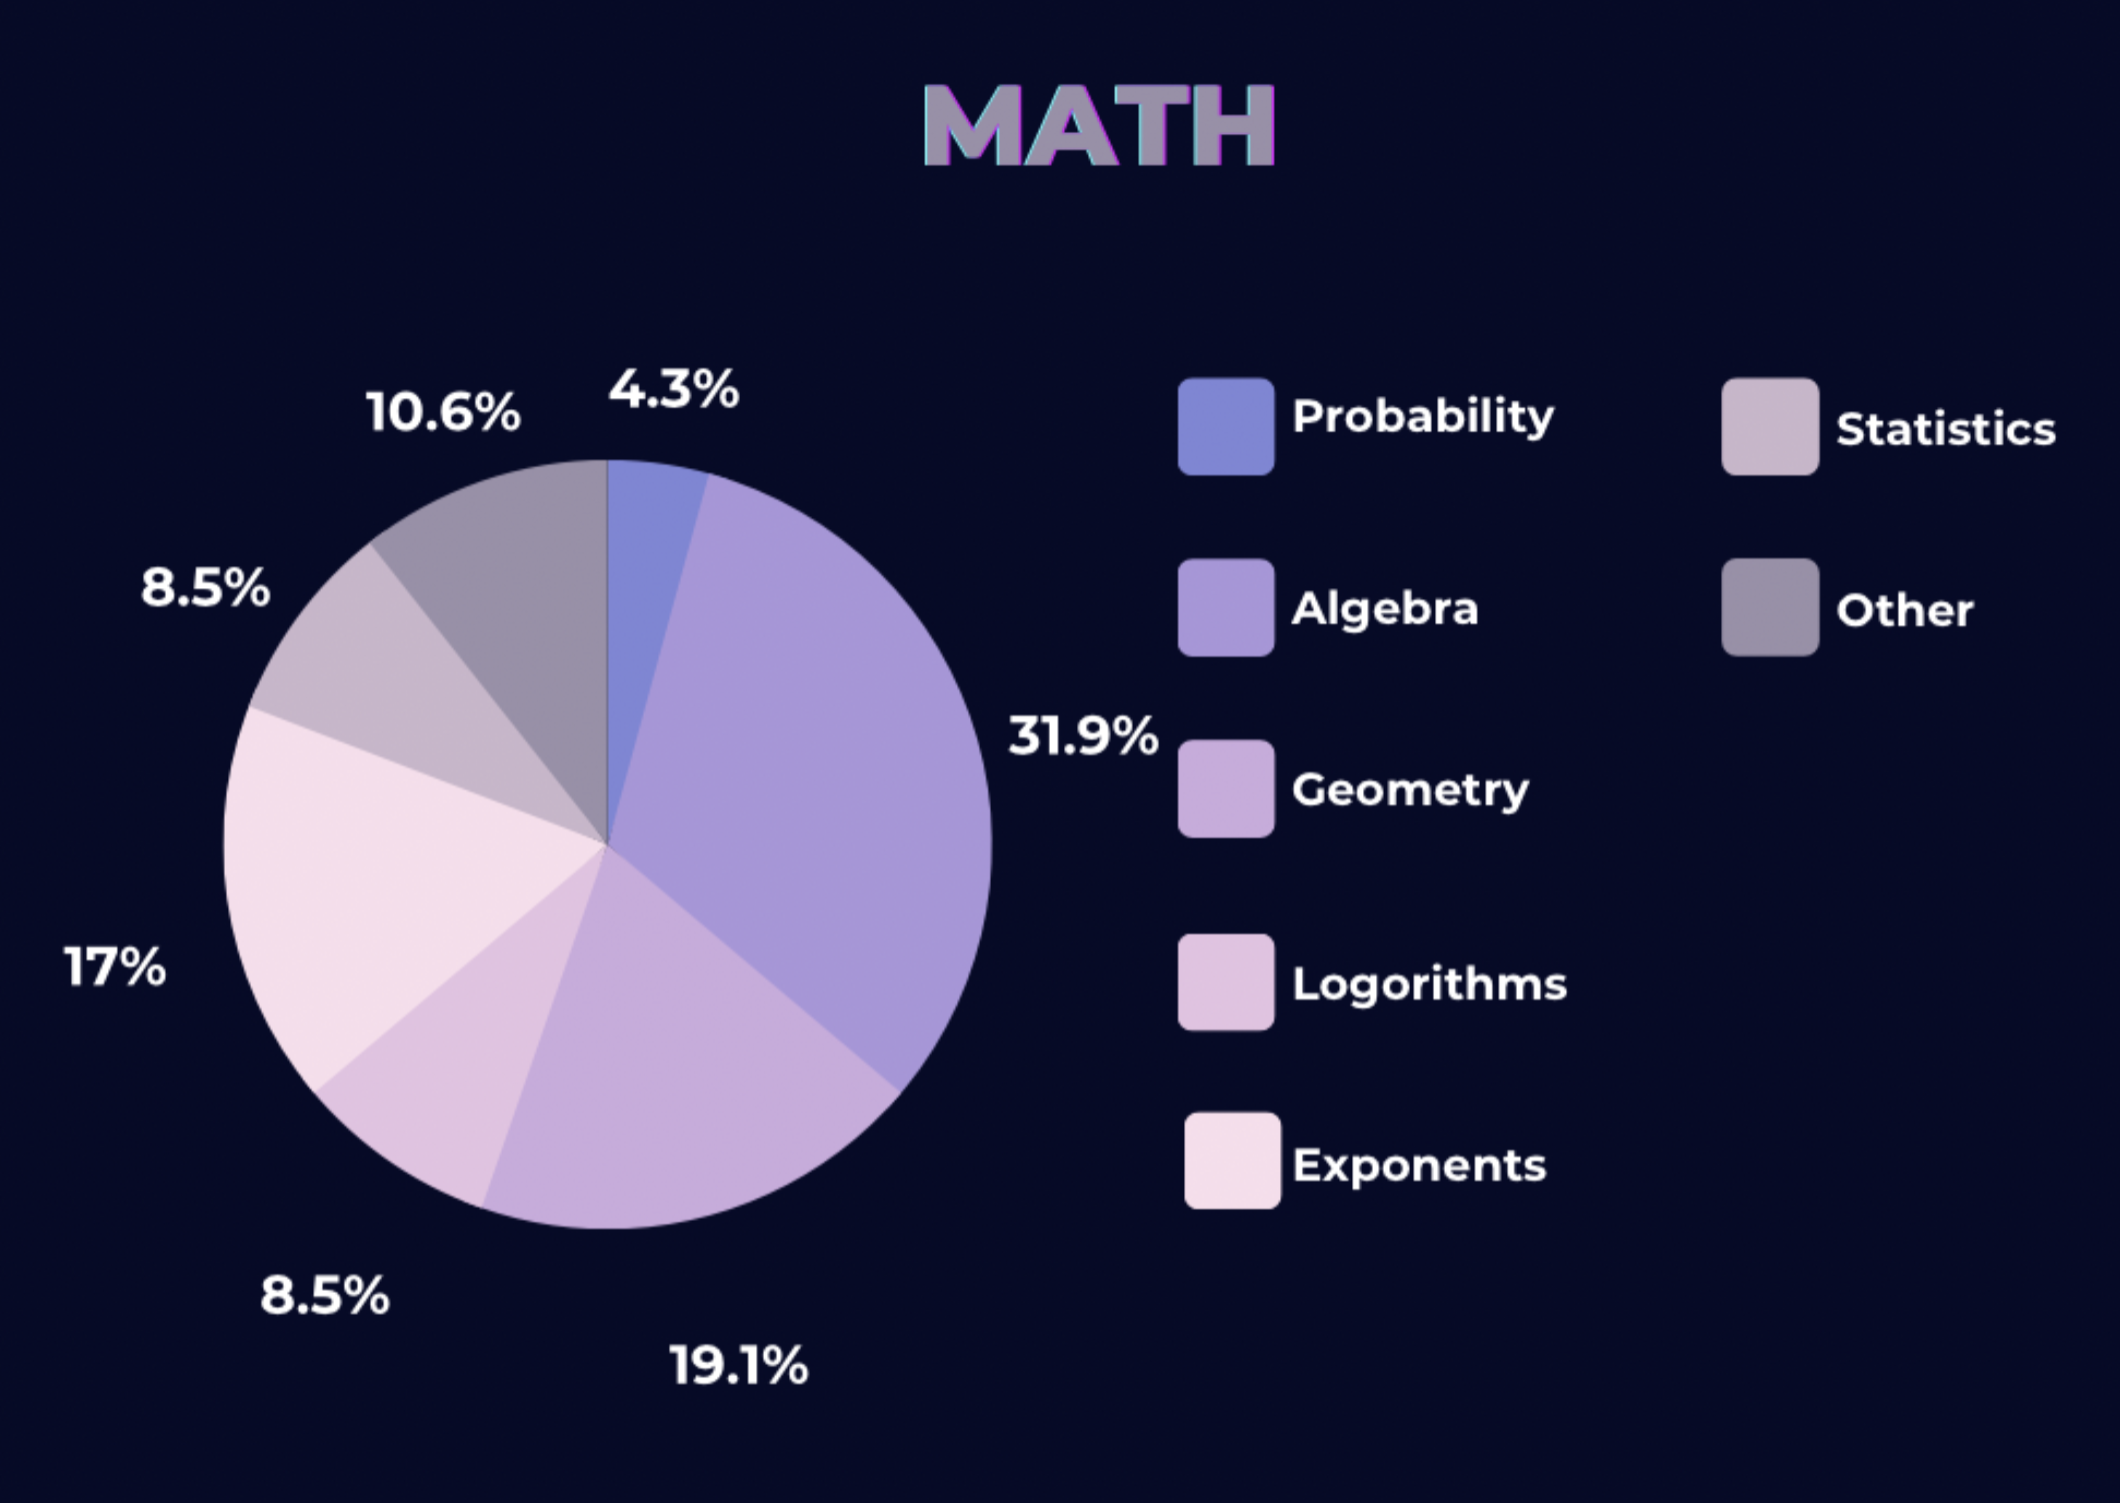 IMAT Math section breakdown from 2011 to 2022